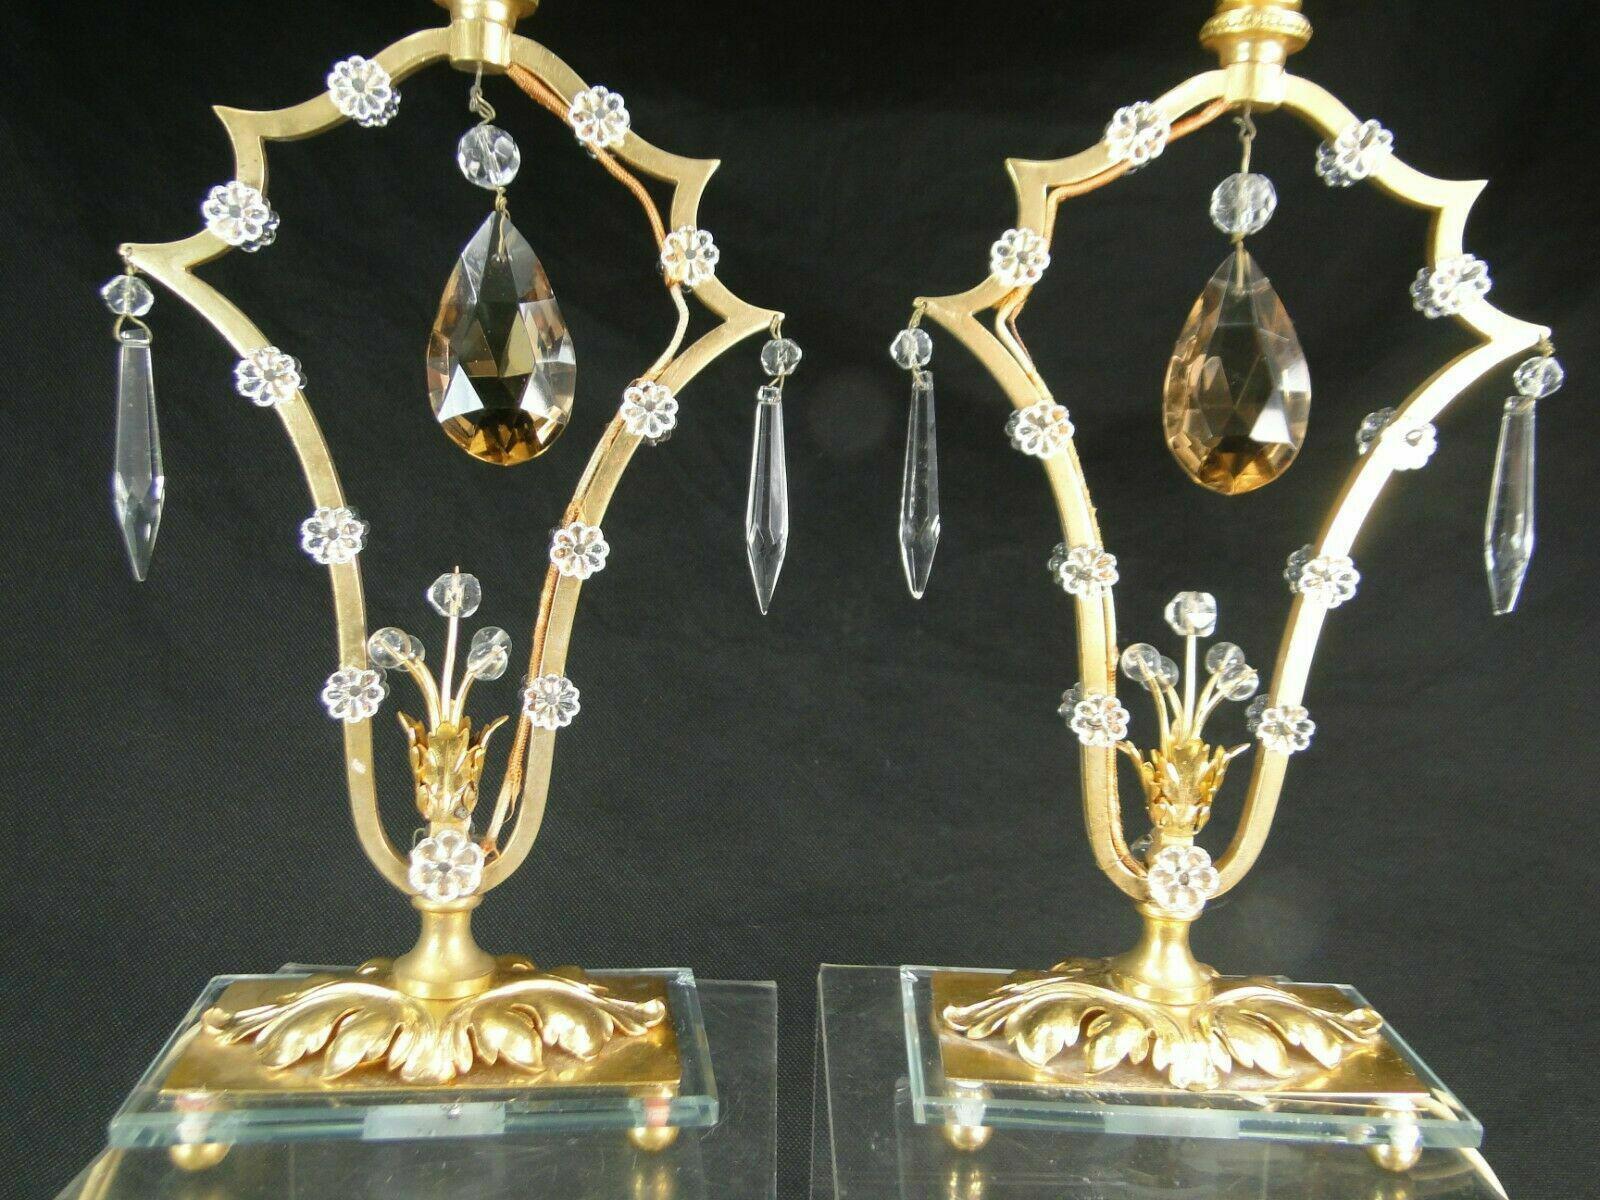 Pair 1940's French Hollywood Regency Gilt Bronze and Cut Crystal Table Lamps. Gilt bronze studded with fleurettes. These are a petite size, maybe night stand use or for your perfect spot that needs a gorgeous pair of high end statement lamps.  On